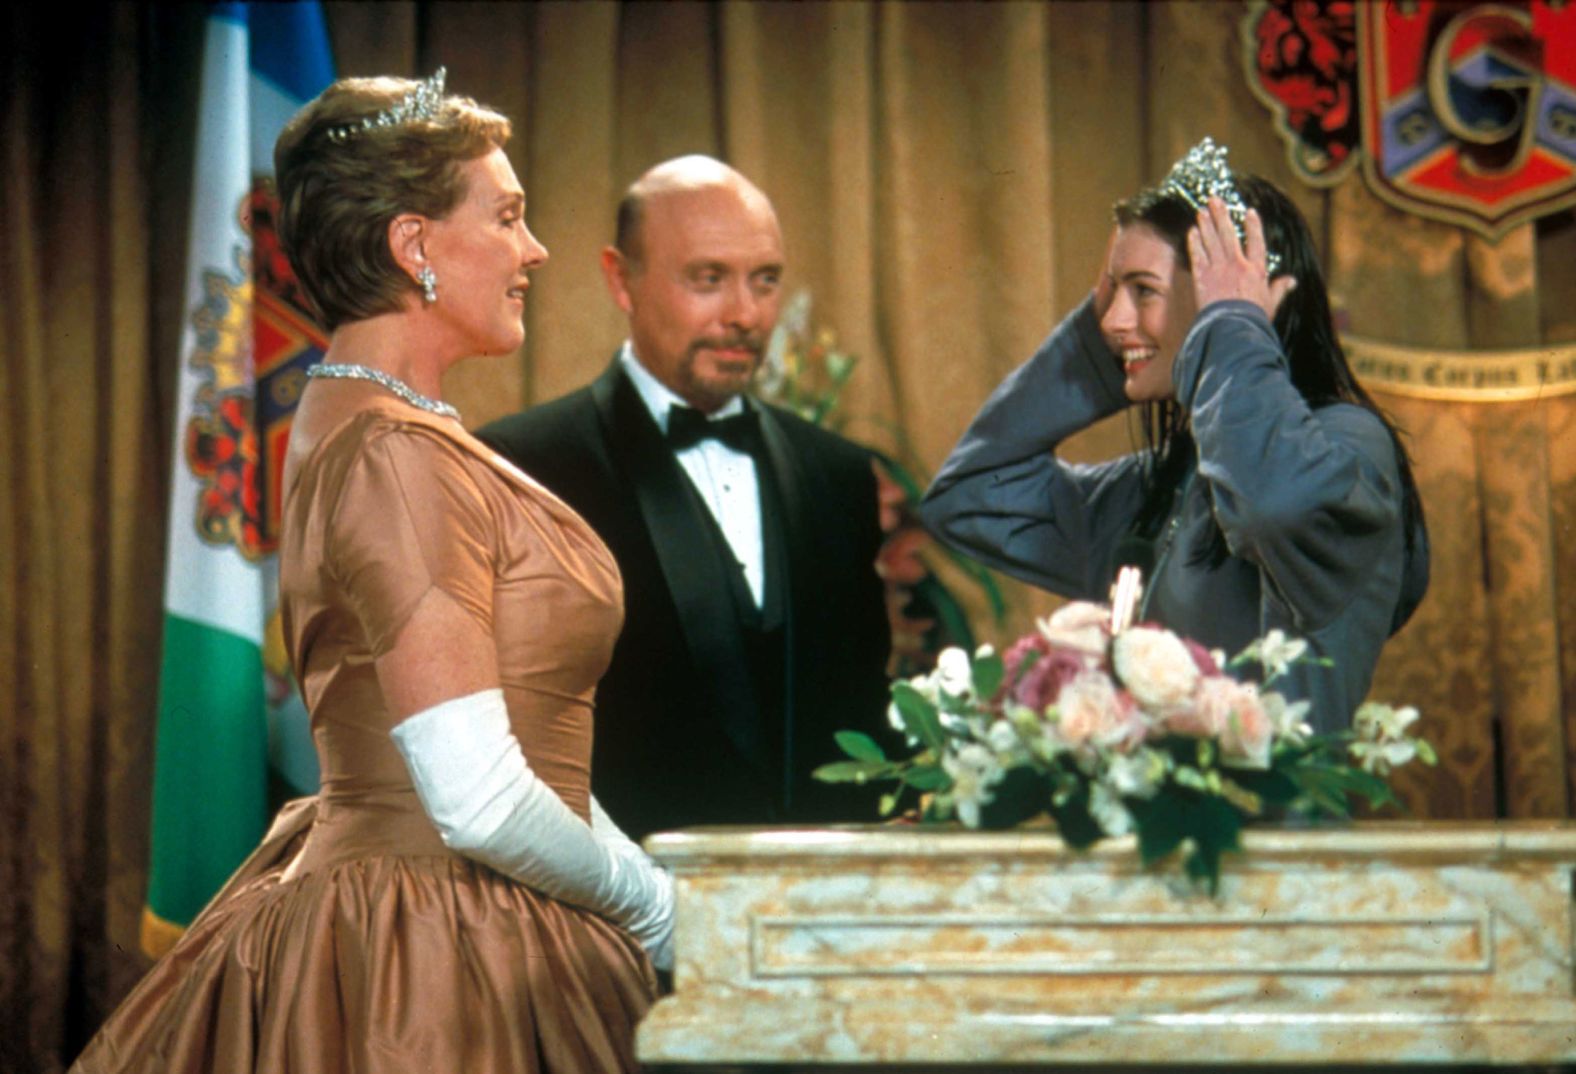 Andrews appears with Hector Elizondo and Anne Hathaway in the 2001 film "The Princess Diaries."